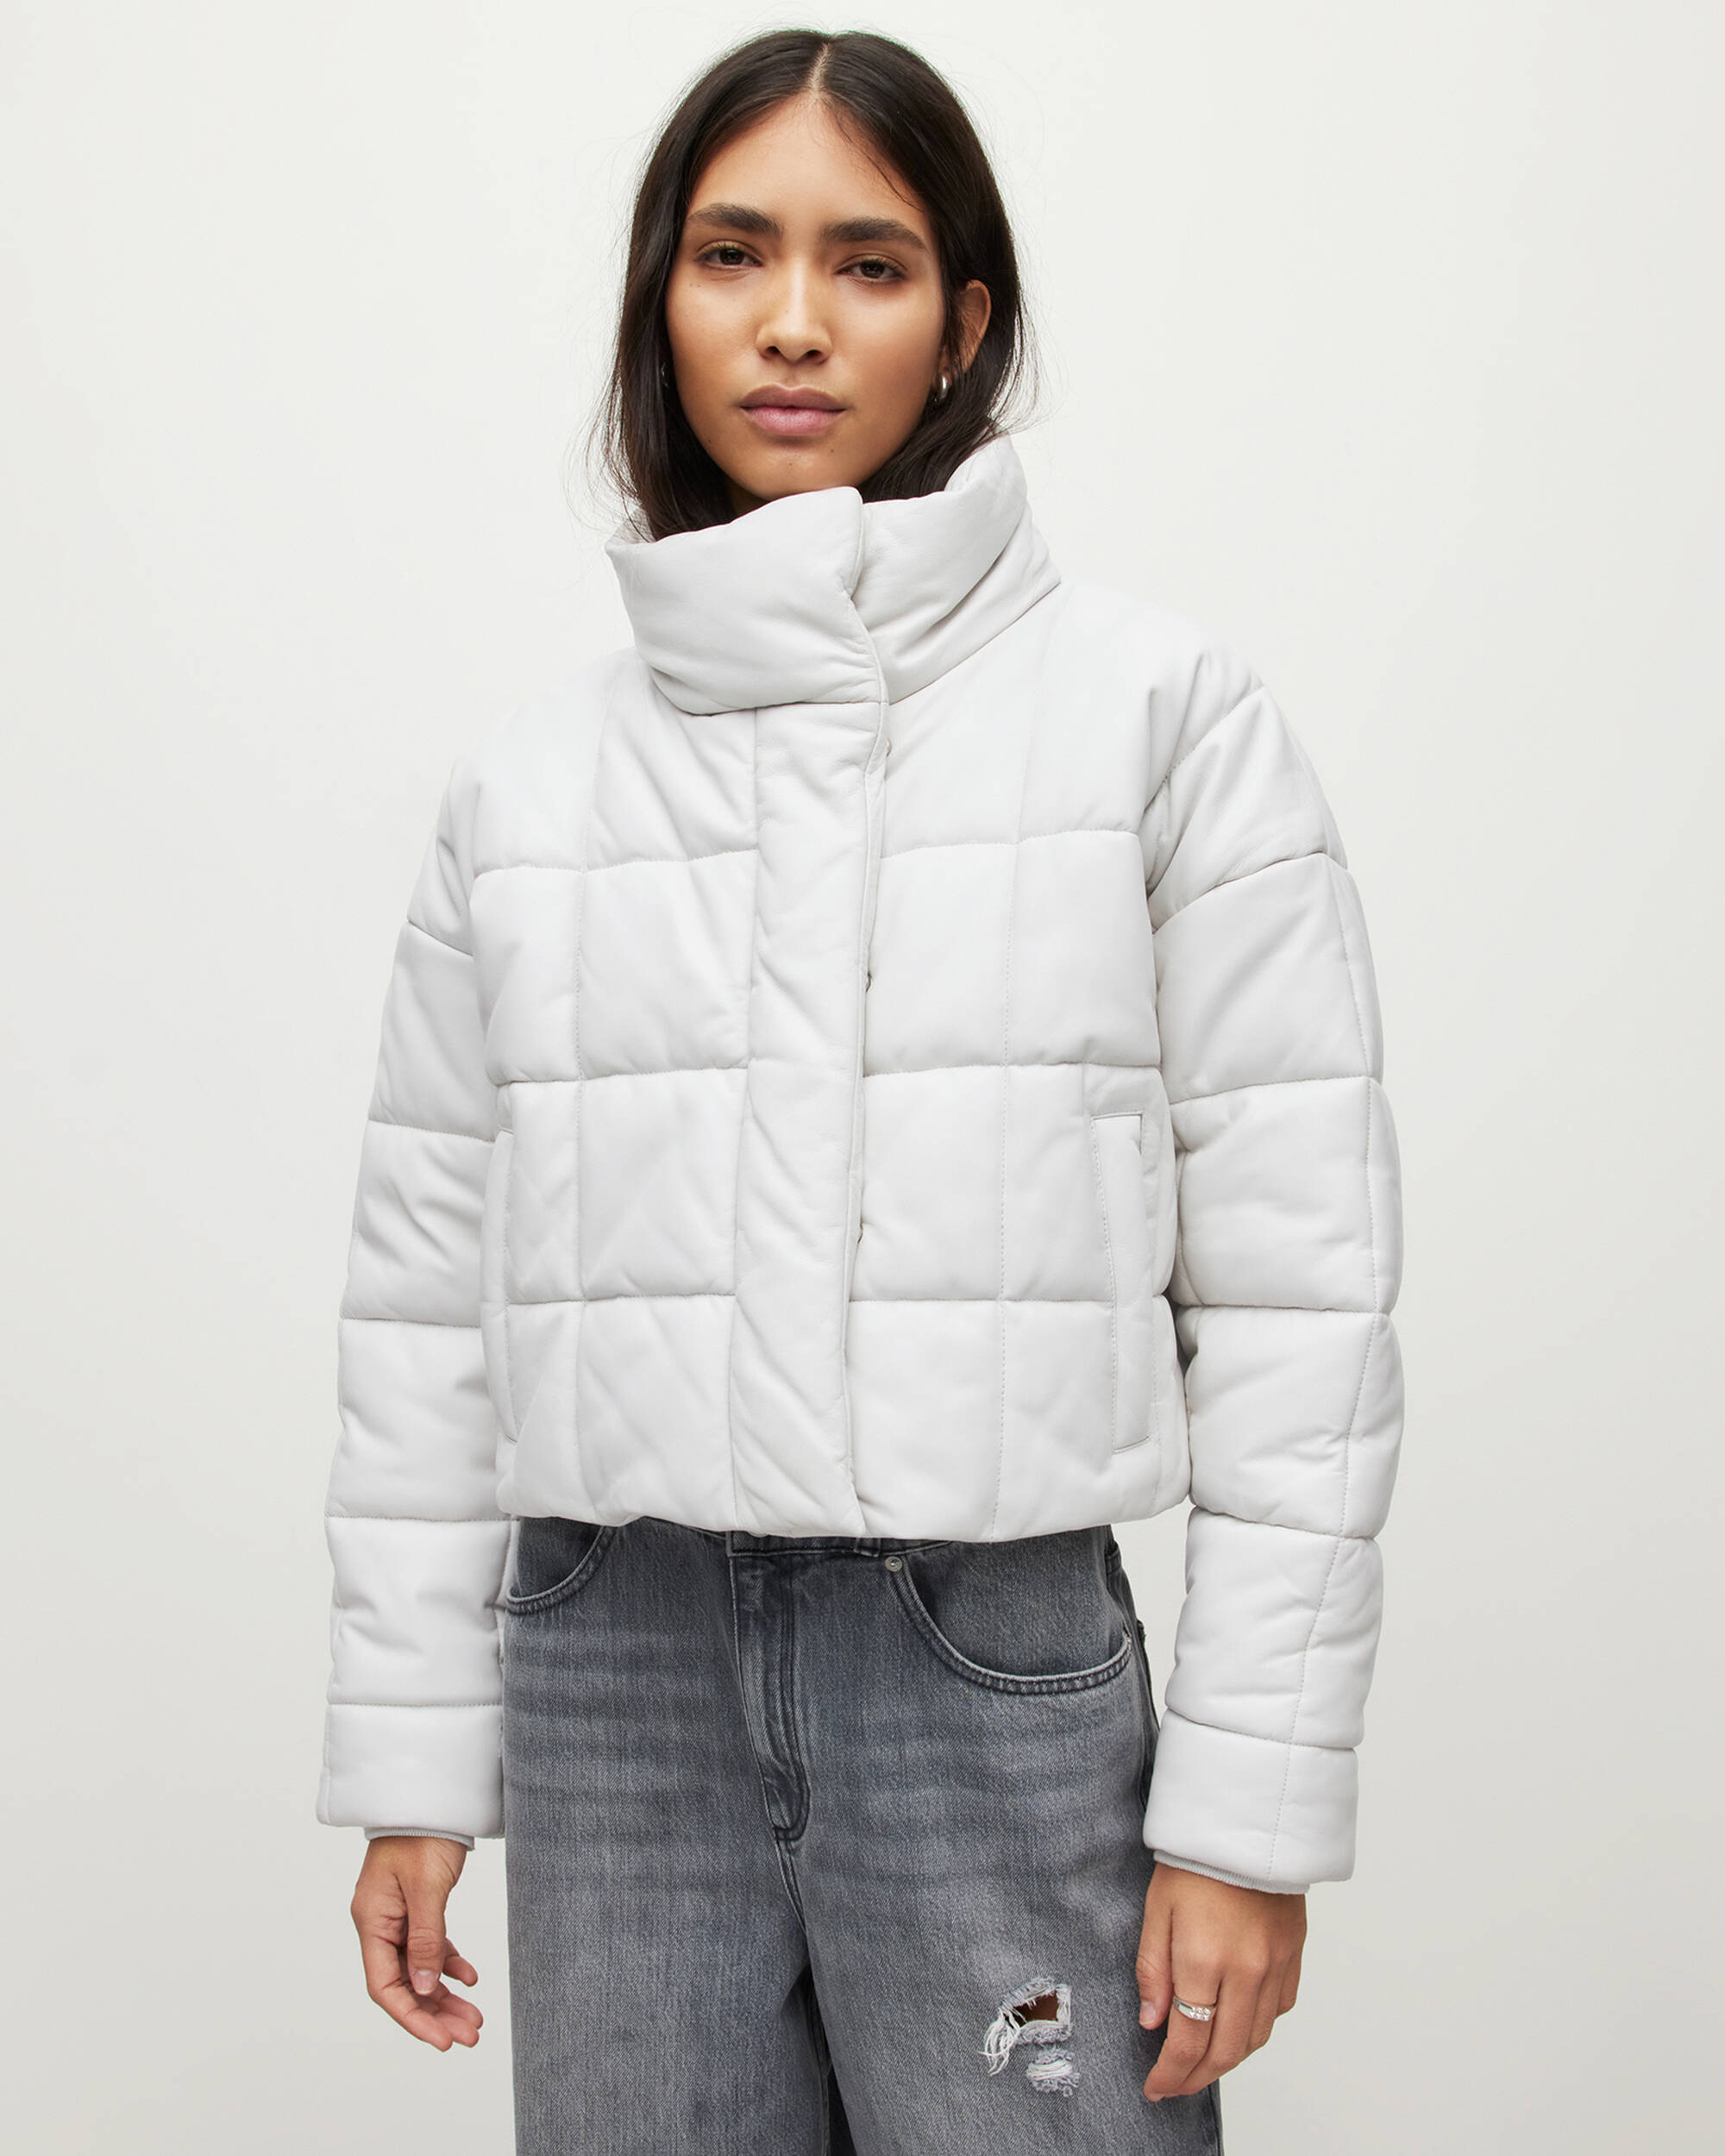 Petra Leather Puffer Jacket White | ALLSAINTS